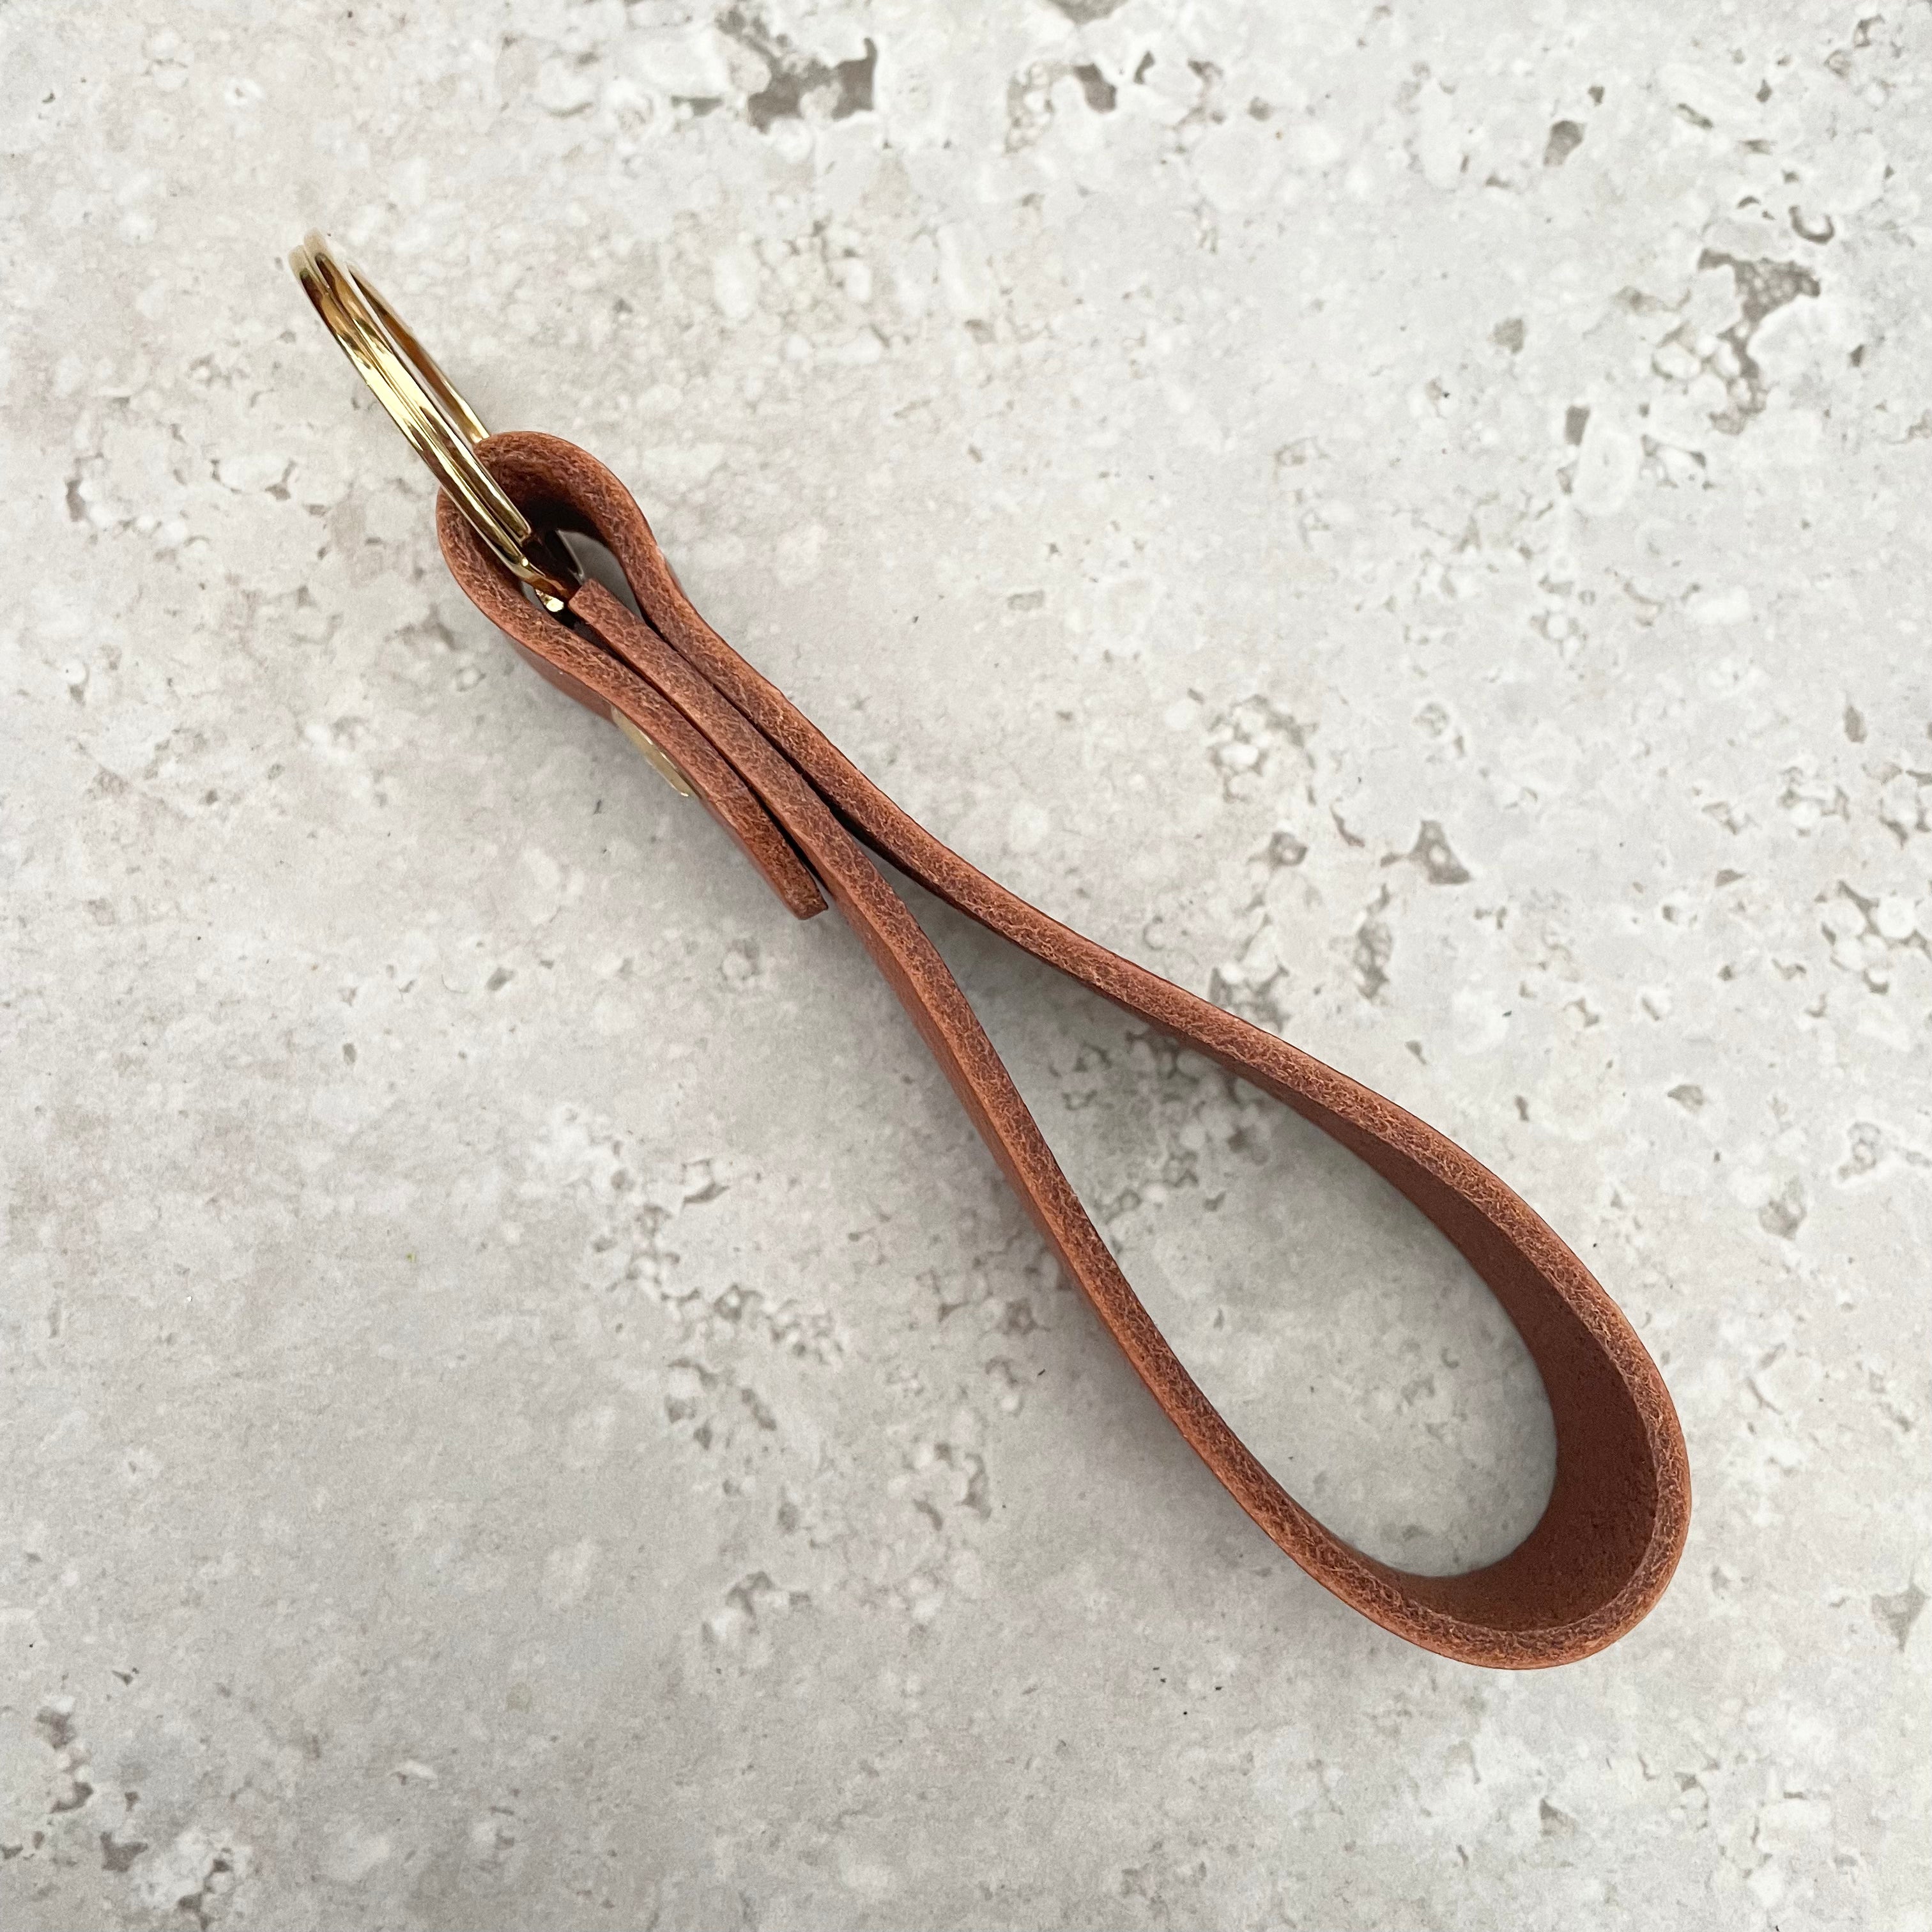 Loxley Loop Keyring - Whisky Leather